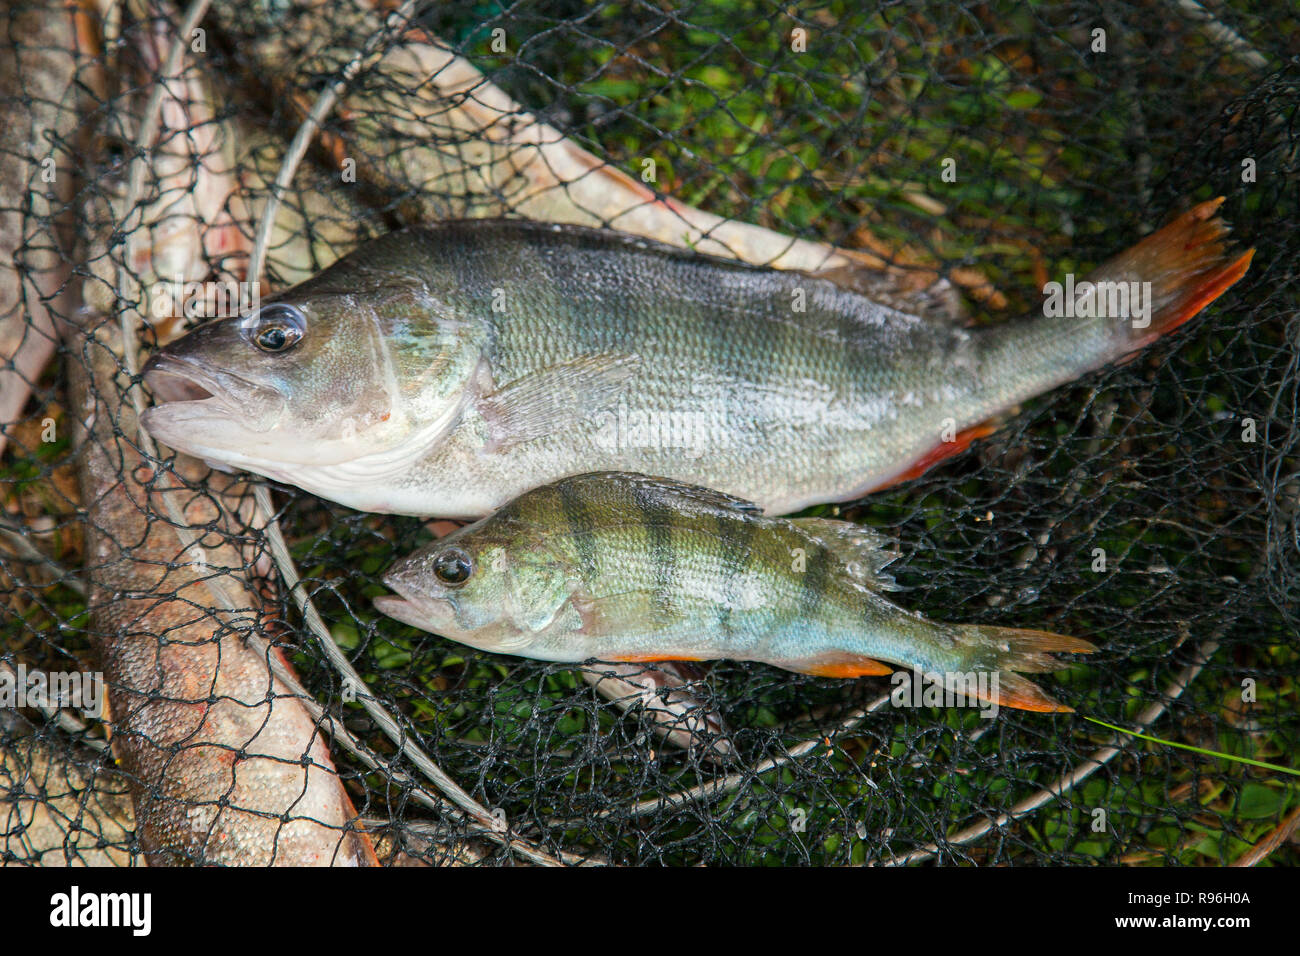 Close up view of freshwater perches. Fishing concept, good catch - two freshwater perch fish just taken from the water on natural background. Stock Photo